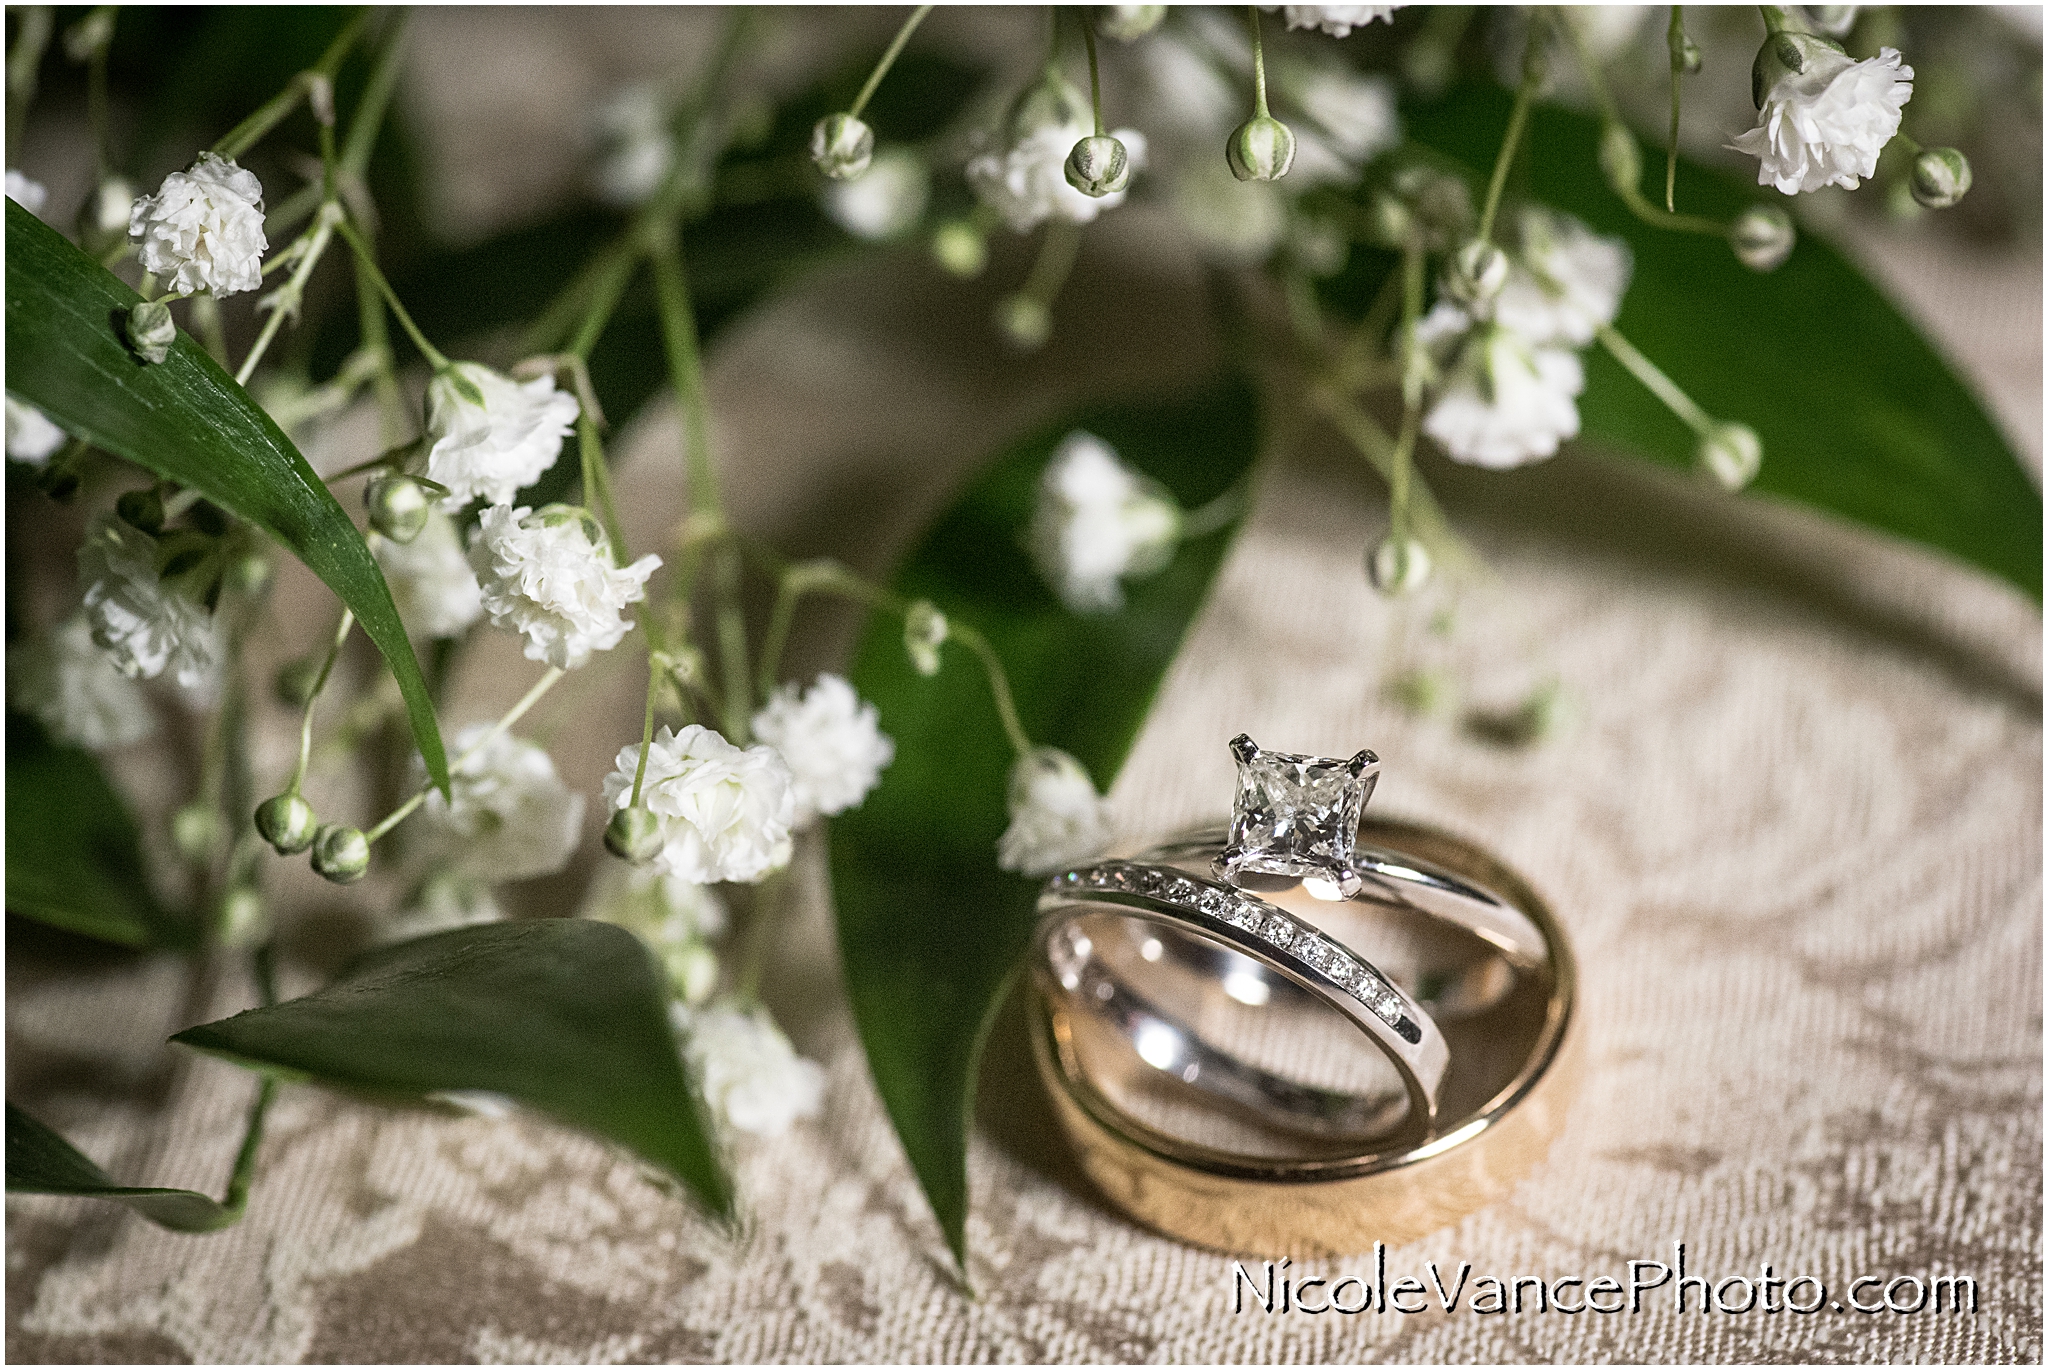 Baby's breath and greenery accent this beautiful bridal jewelry.